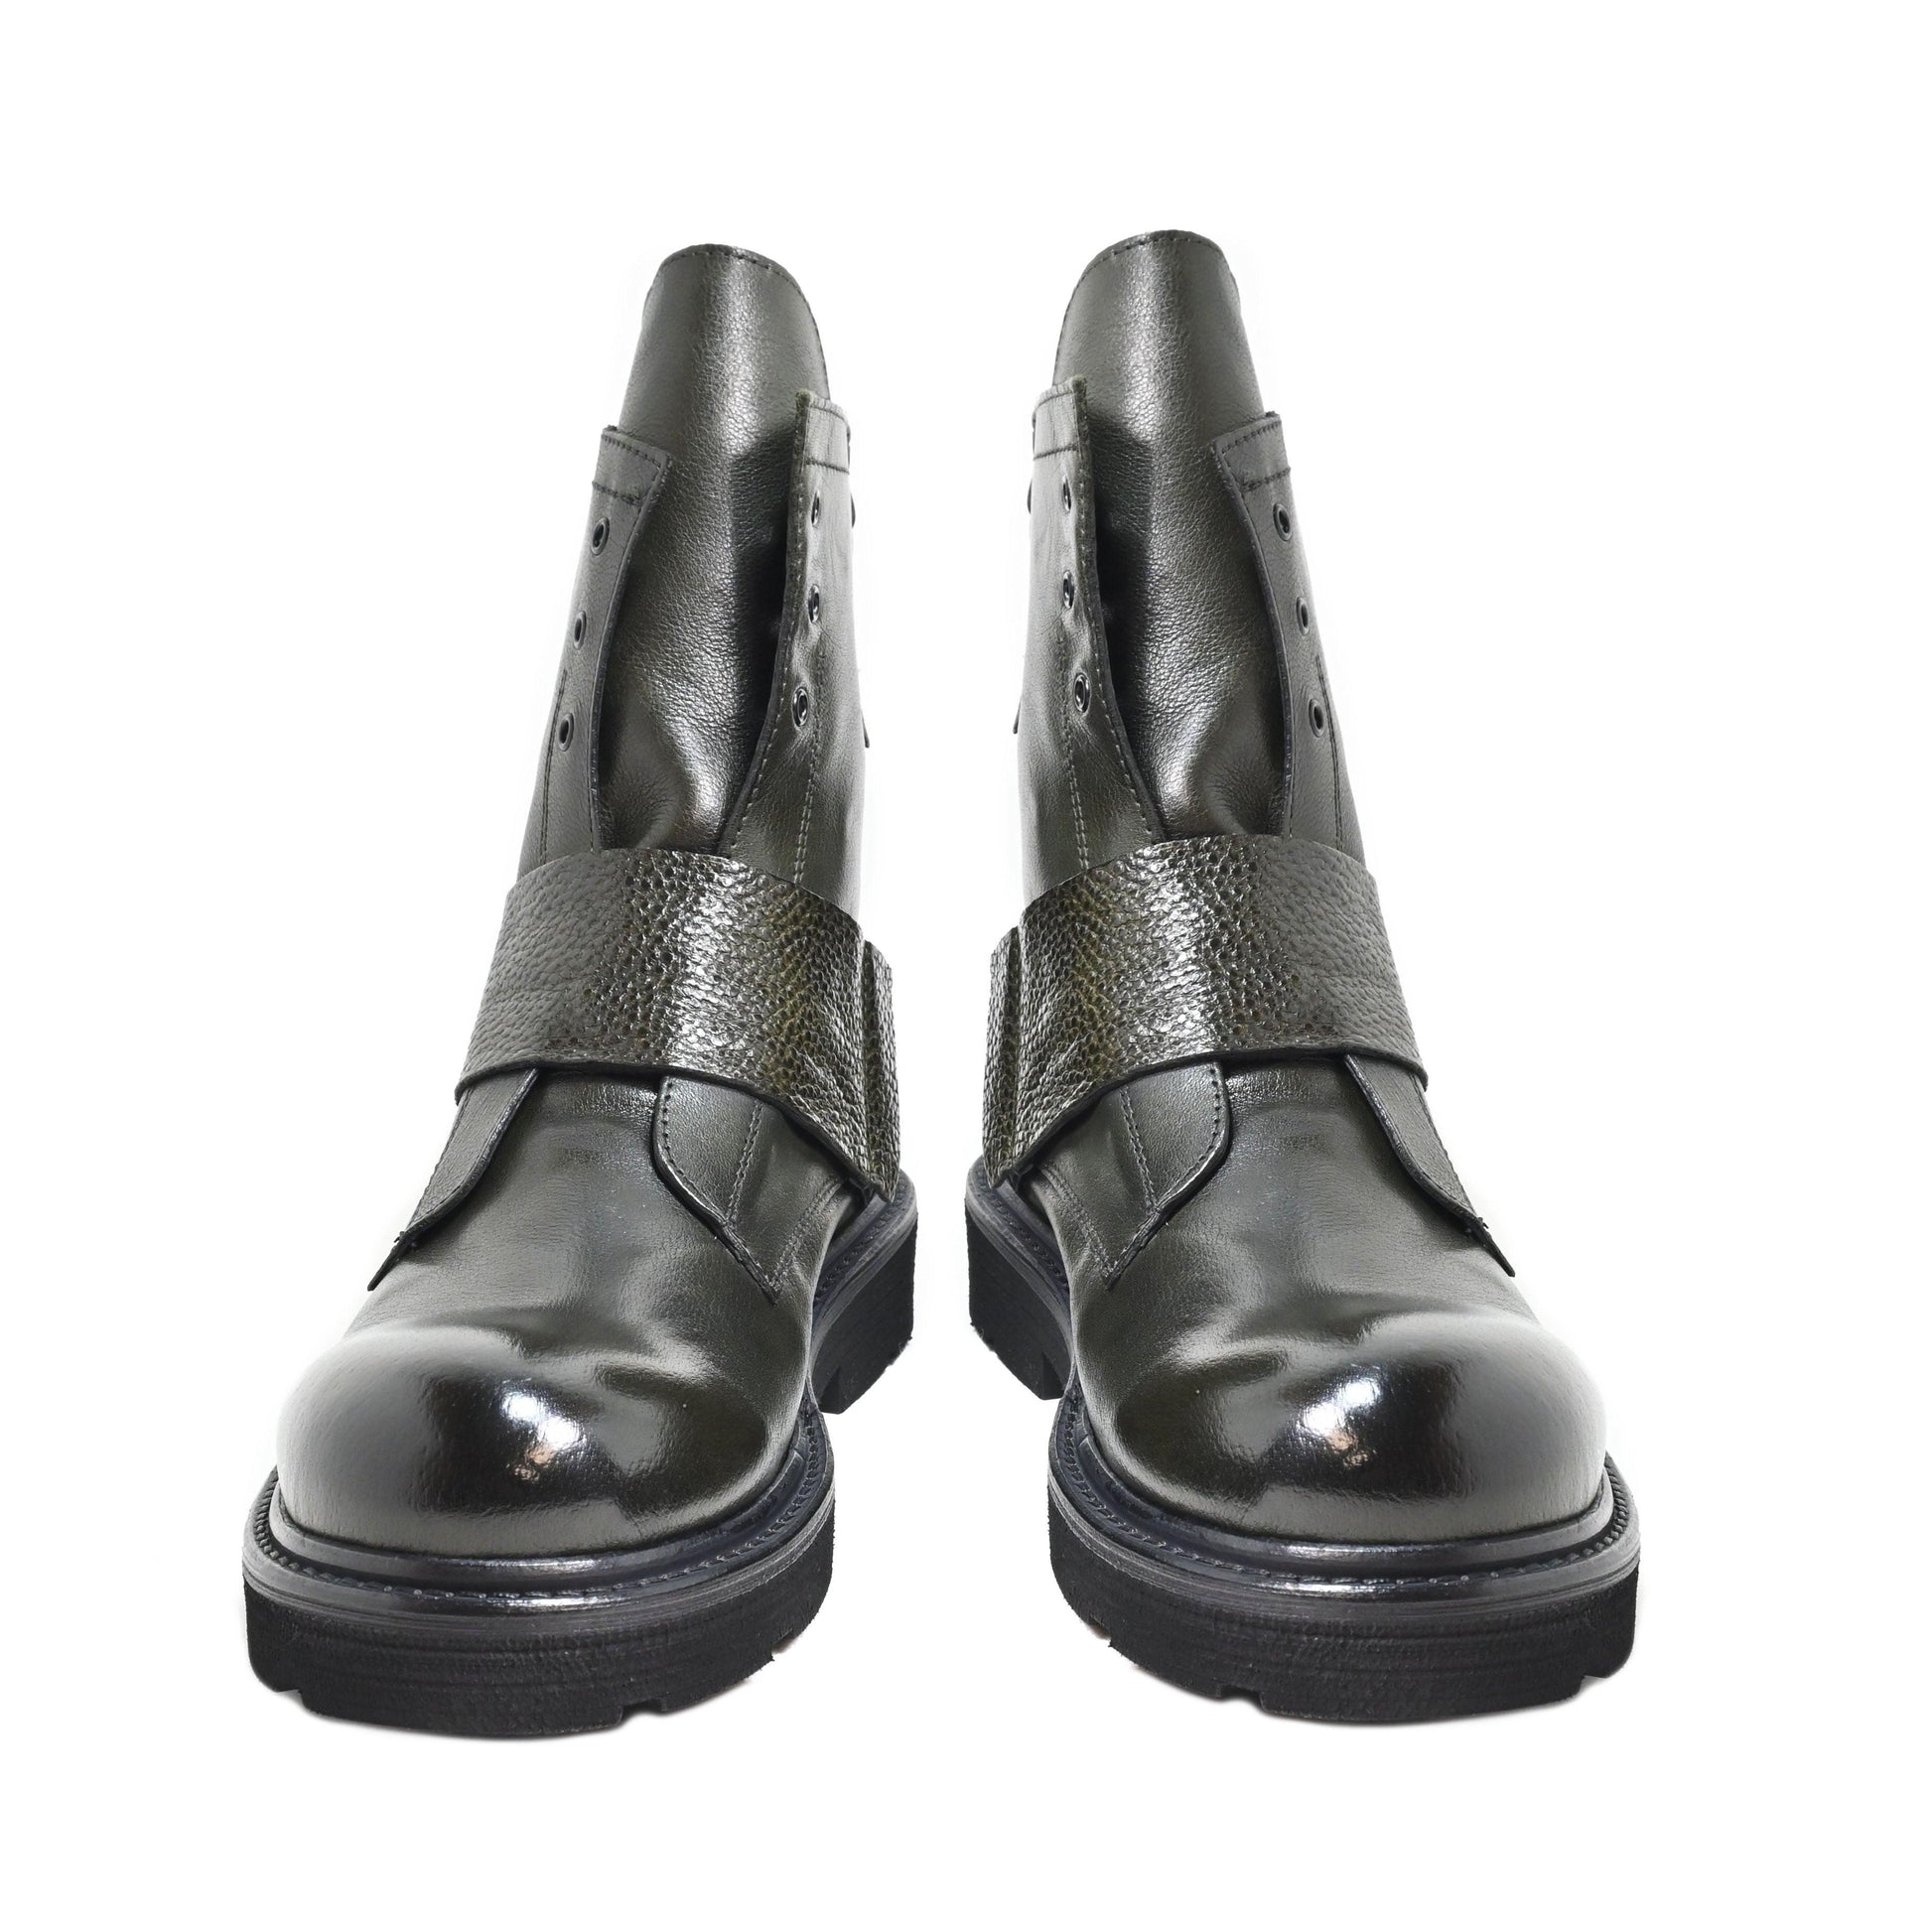 ALBA 33 - ankle boots leather BOTTLE - History541